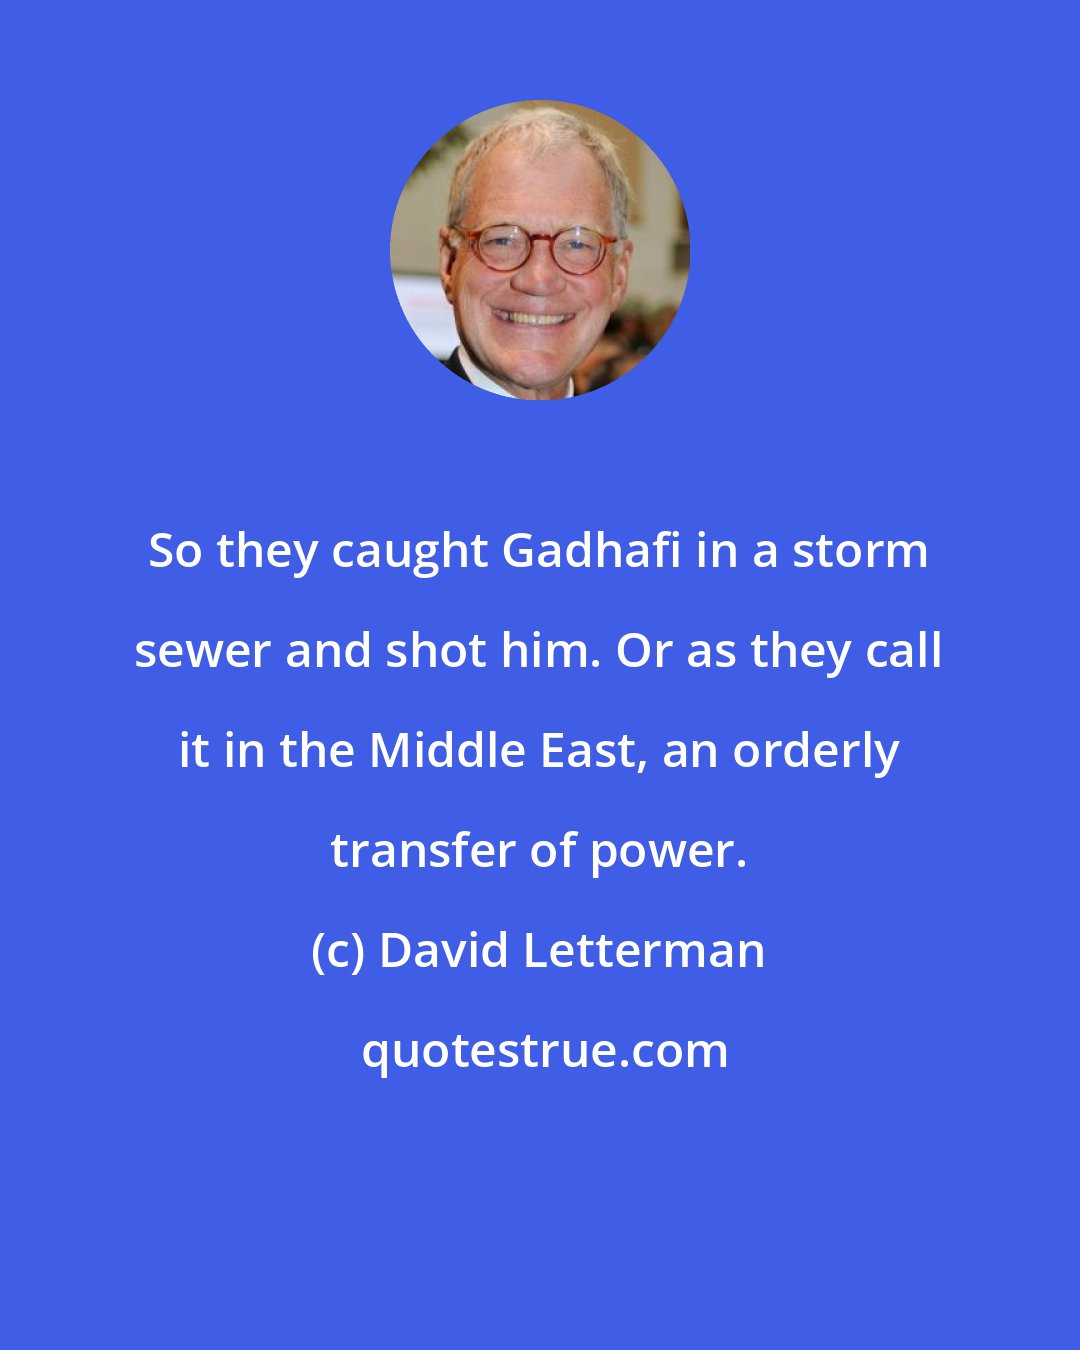 David Letterman: So they caught Gadhafi in a storm sewer and shot him. Or as they call it in the Middle East, an orderly transfer of power.